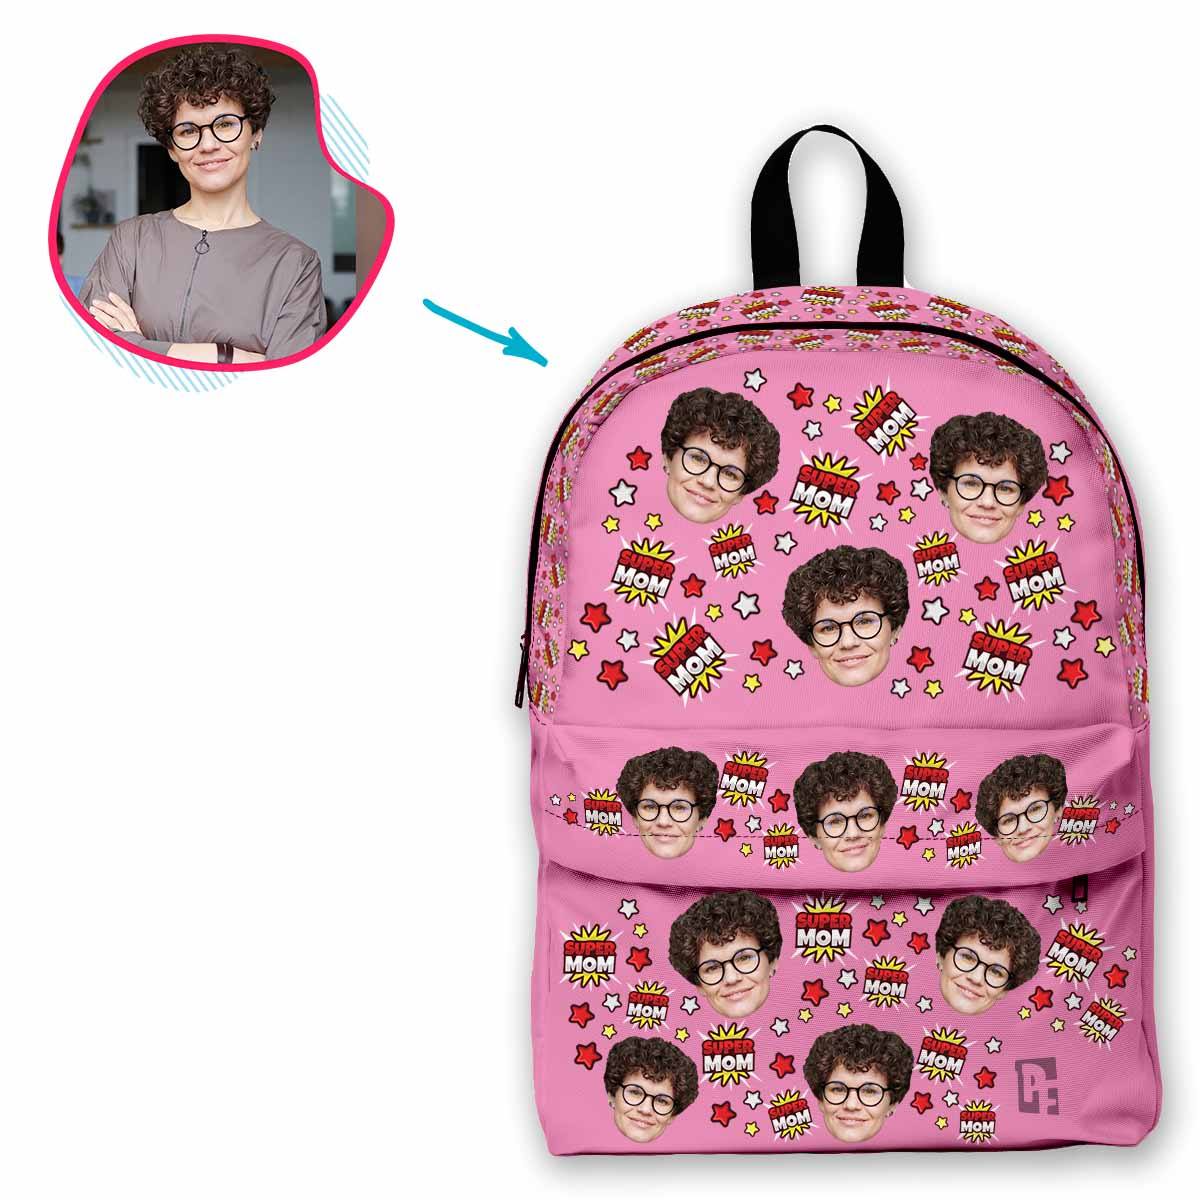 pink Super Mom classic backpack personalized with photo of face printed on it